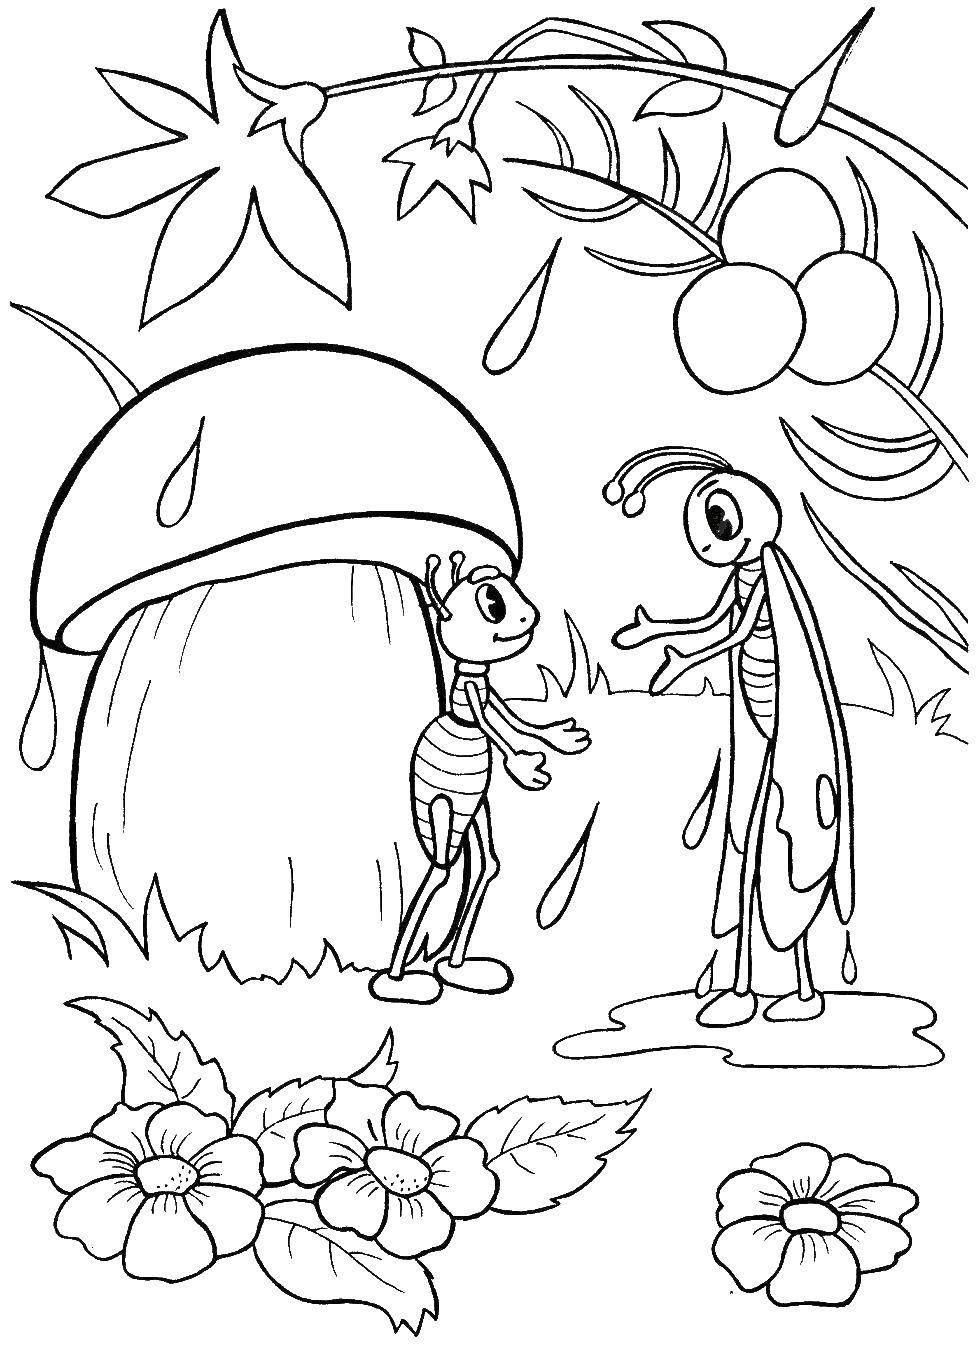 Coloring The ant and the grasshopper under a mushroom. Category Fairy tales. Tags:  Fairy tales.